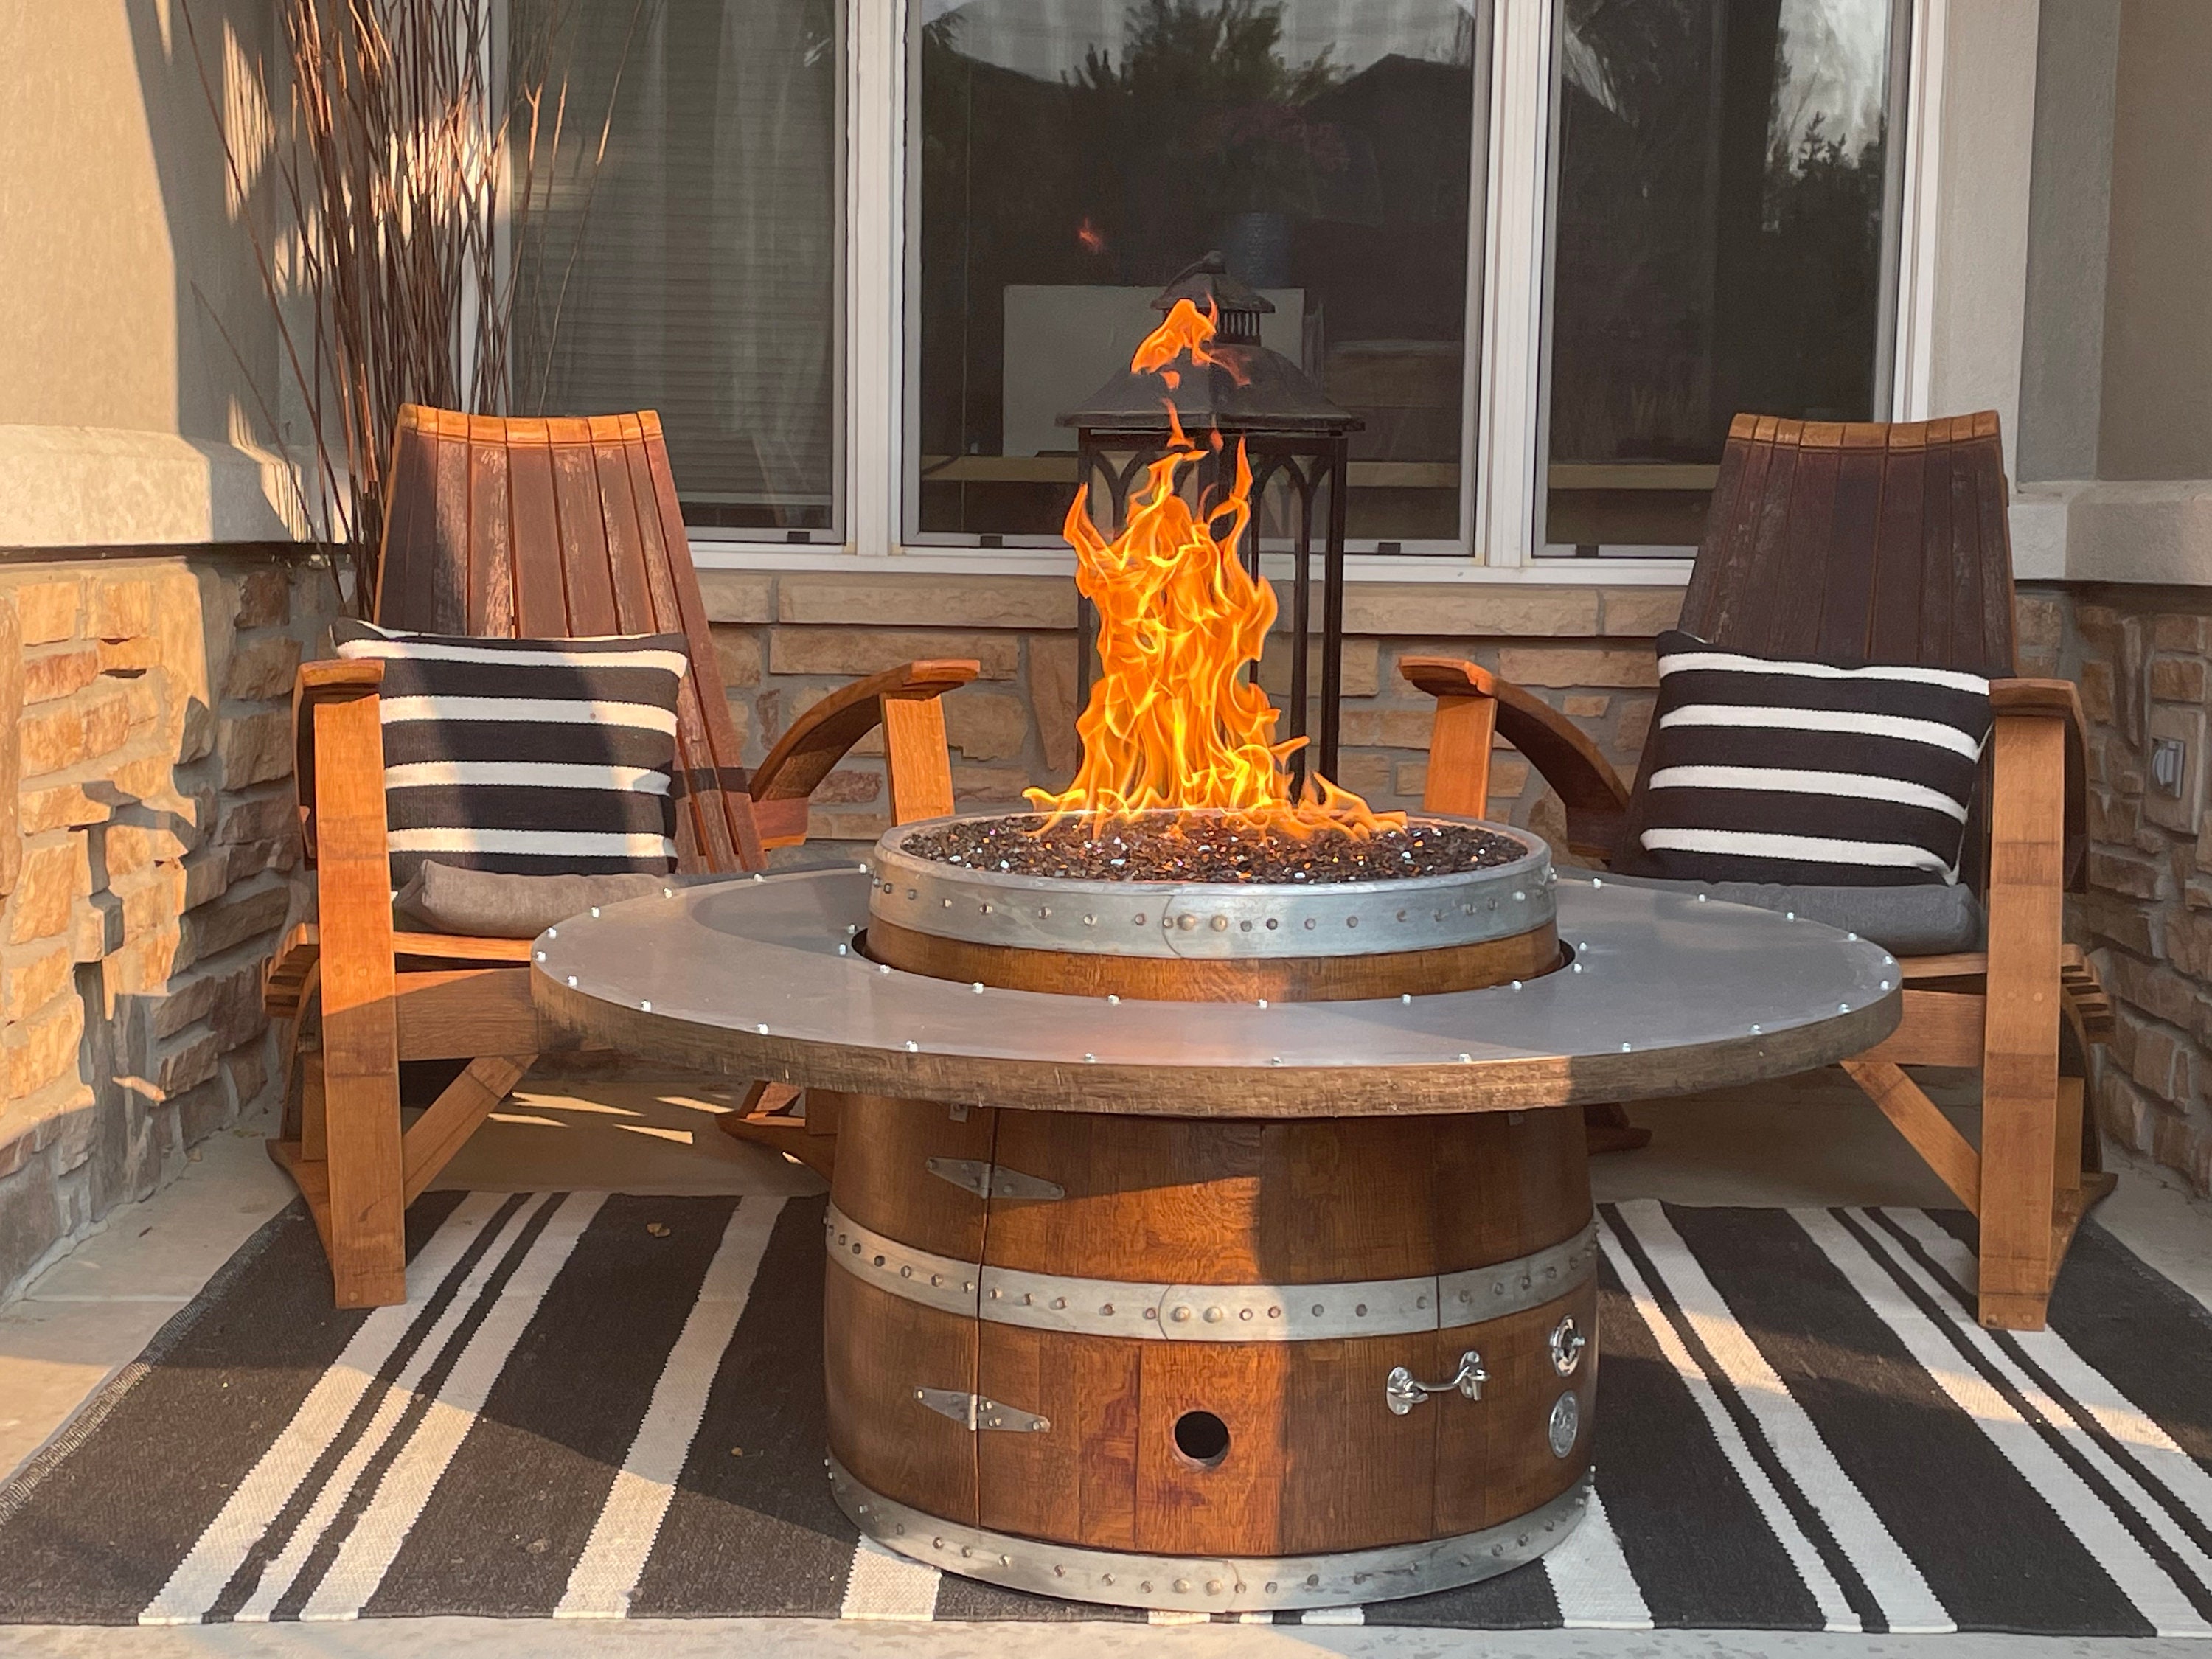 Vakollia Propane Fire Pit Table,44 Inch 55000 BTU Outdoor Gas Fire Pit Rectangular with Glass Wind Guard for Outside Patio Deck Gray-Aluminum 